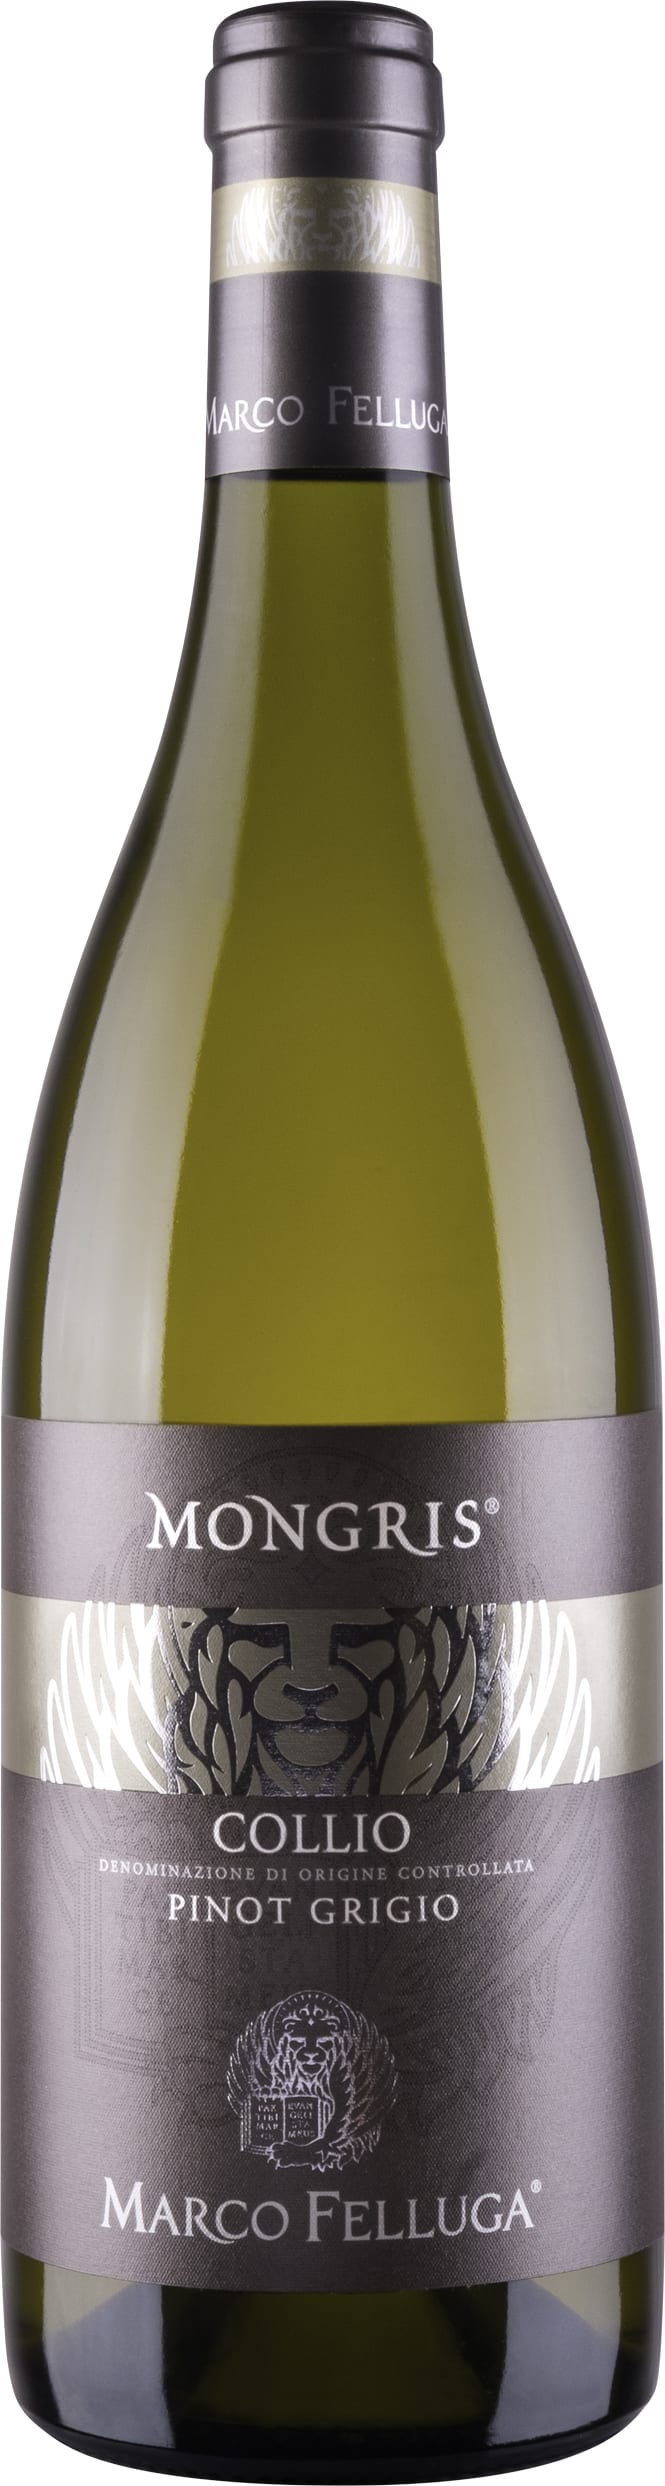 Marco Felluga Collio Pinot Grigio Mongris 2022 75cl - Buy Marco Felluga Wines from GREAT WINES DIRECT wine shop